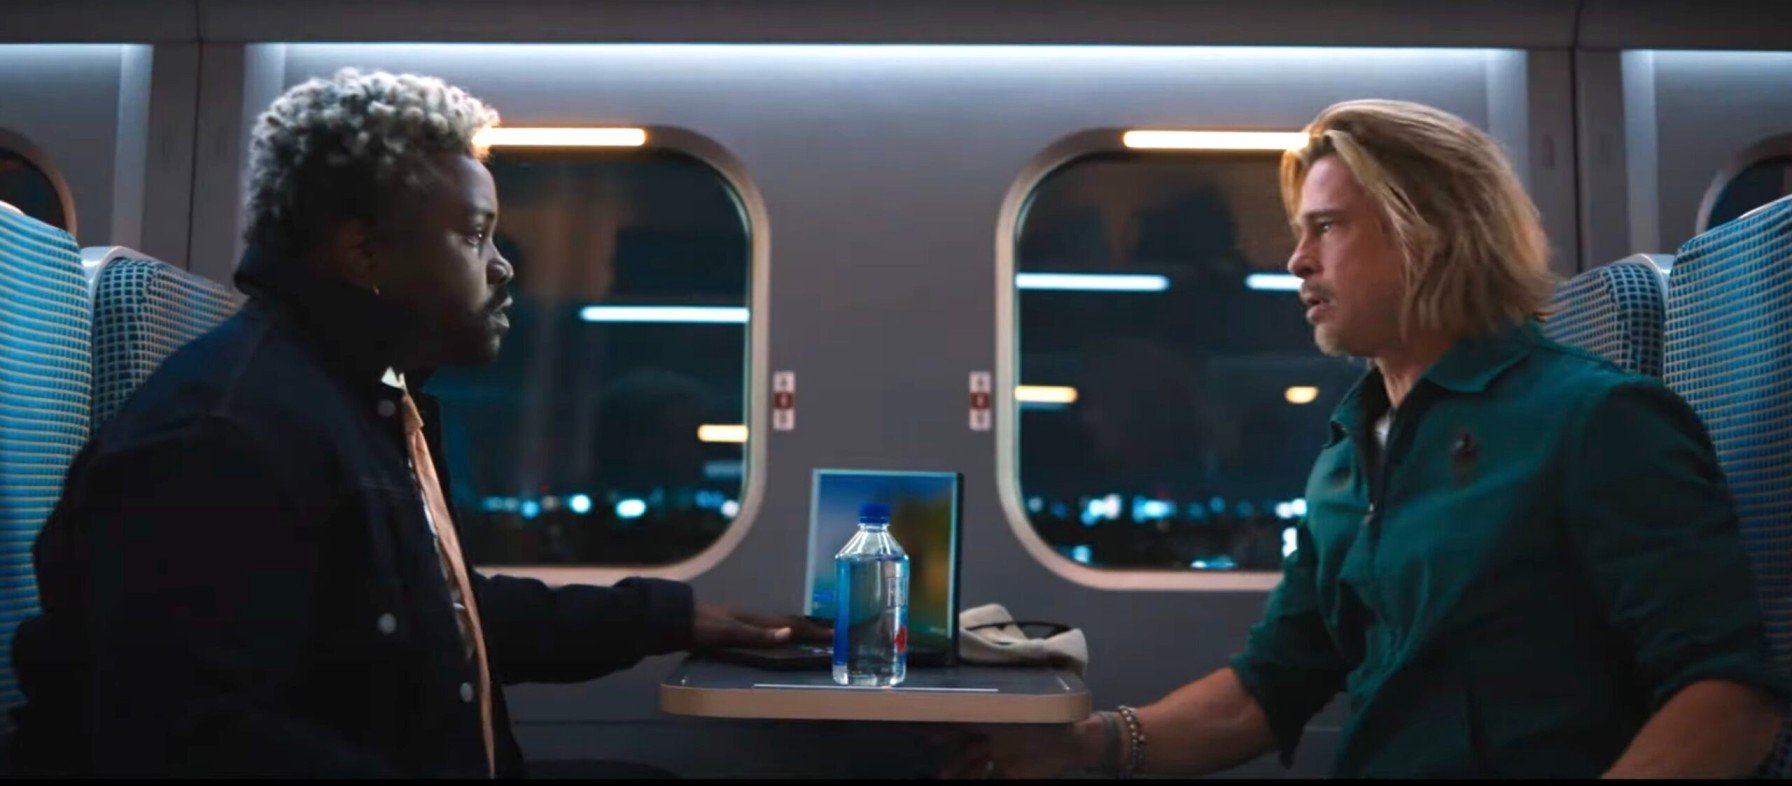 Bullet Train (2022) directed by David Leitch • Reviews, film +